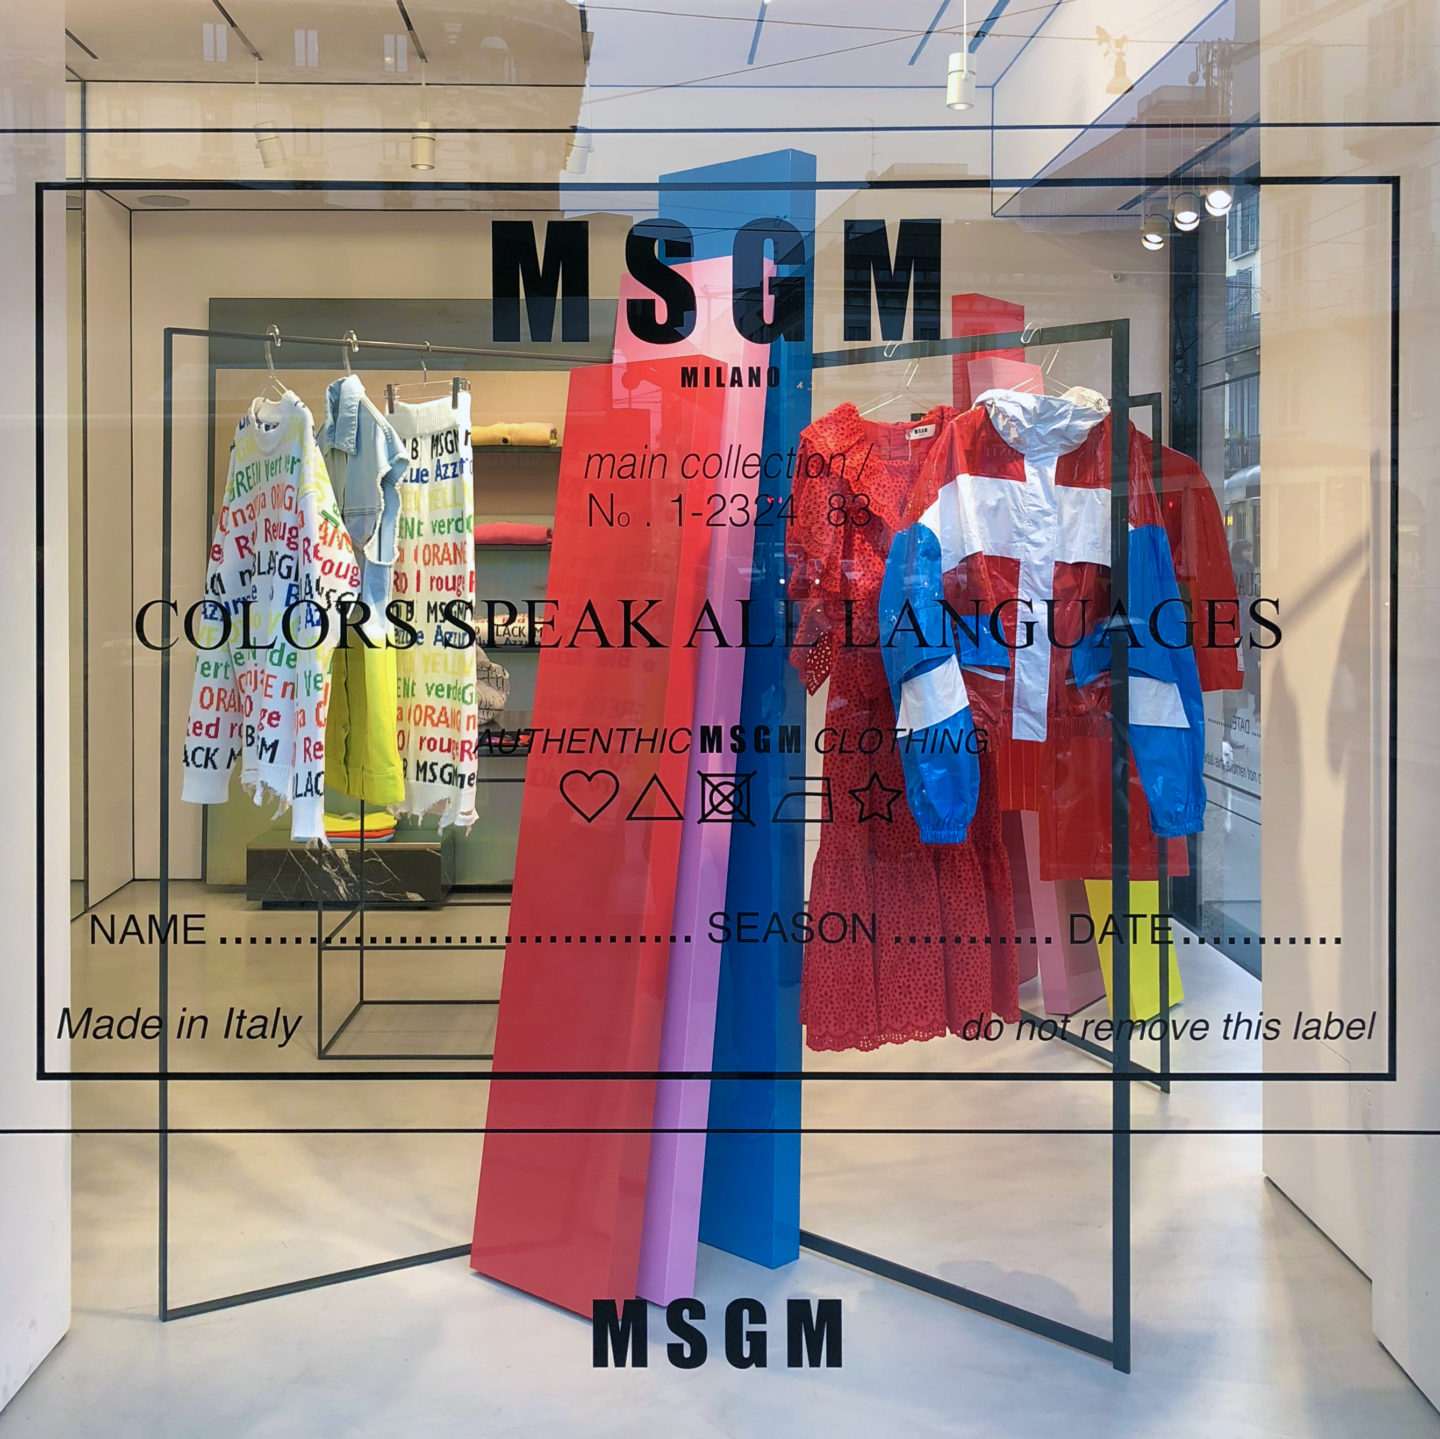 MSGM window totems window display pink blue letterings red sticker colorblock window design